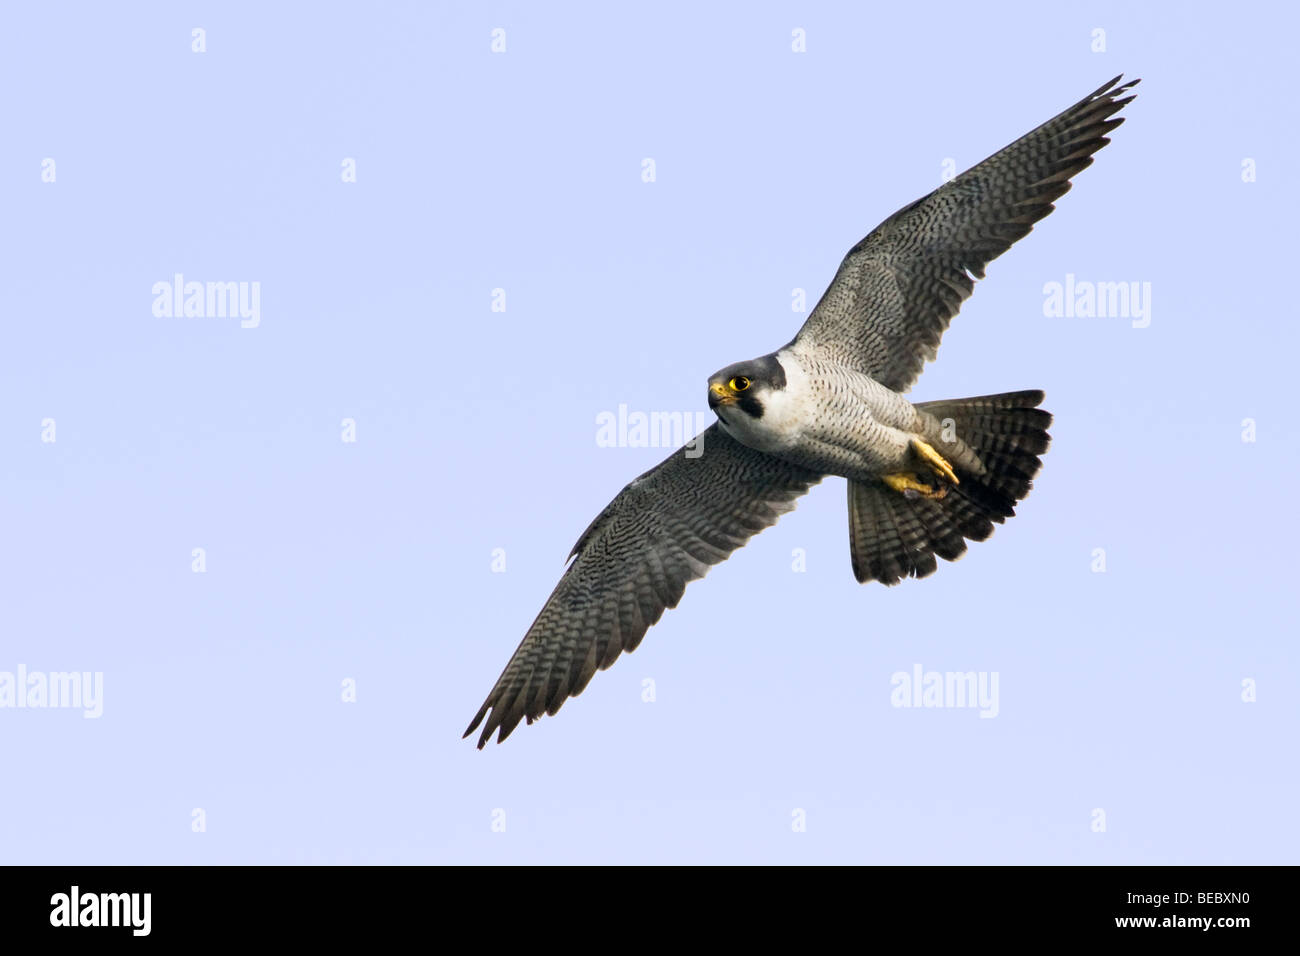 Peregrine Falcon in flight.  Close up against a clear blue sky background.  Excellent  detail of eye, head and feathers. Stock Photo